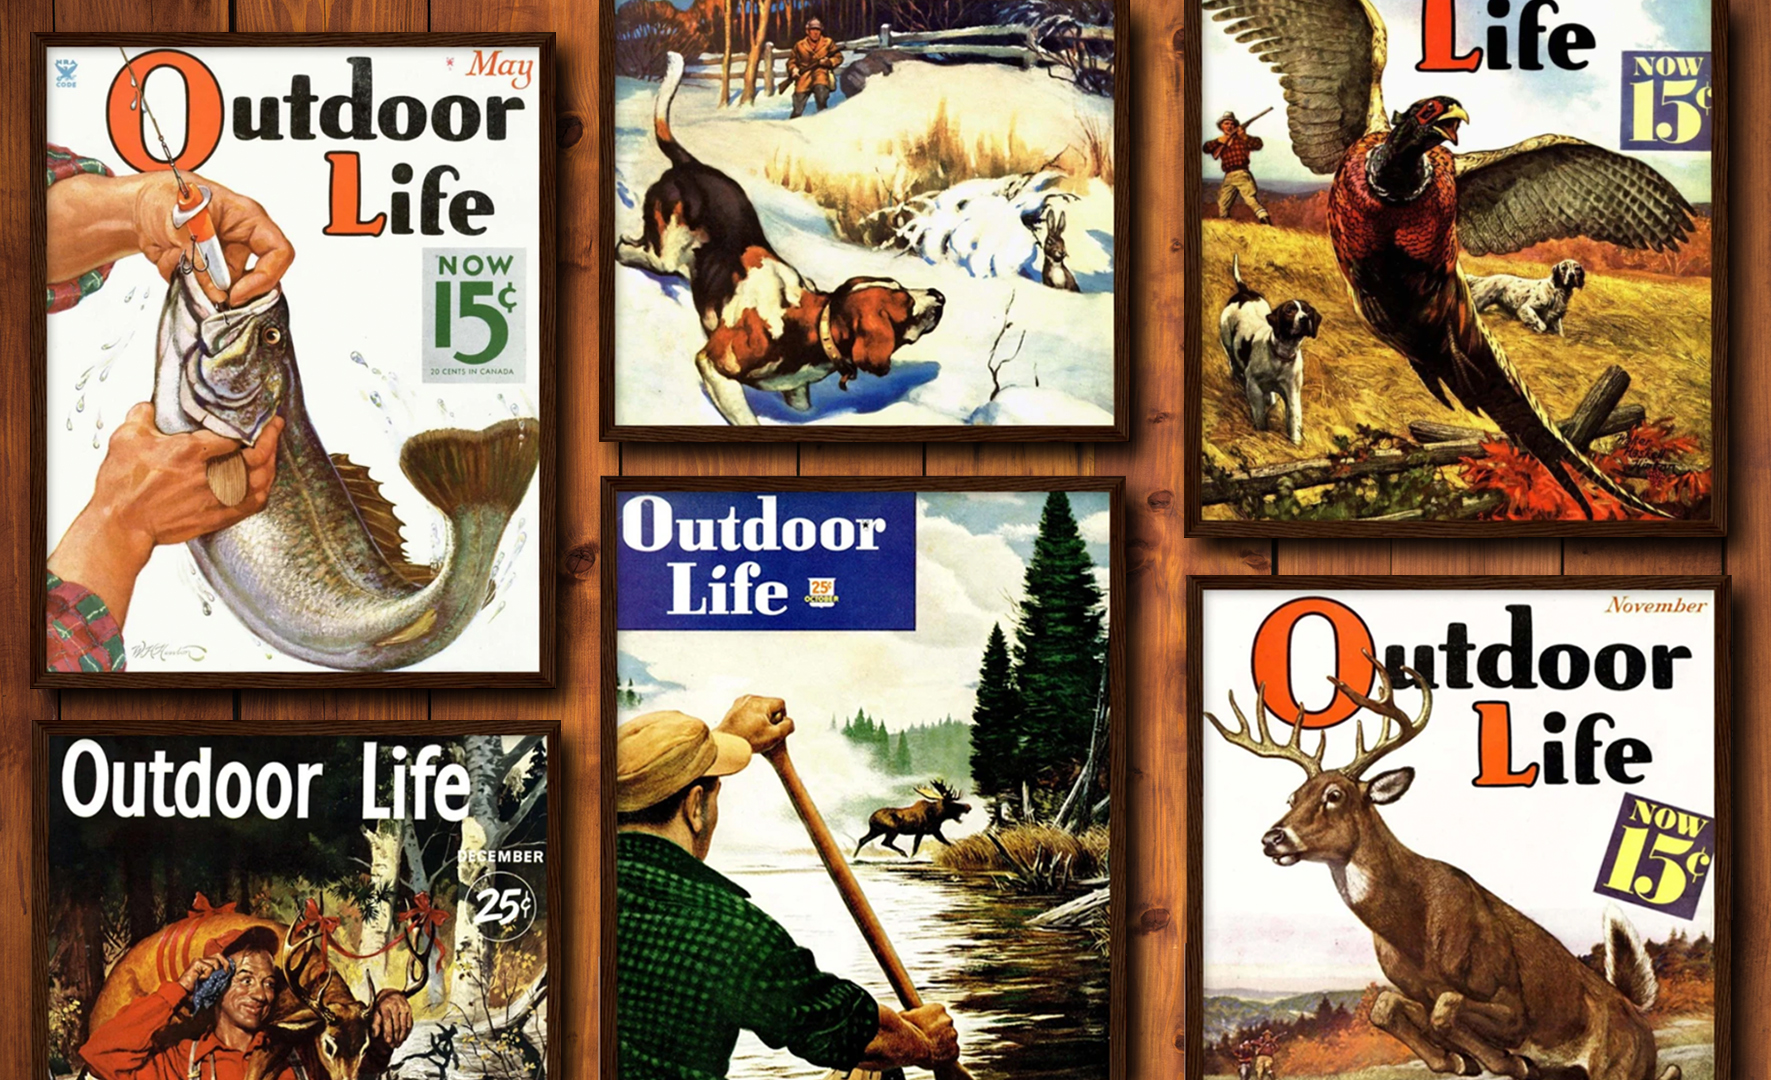 Introducing the Outdoor Life Cover Art Shop